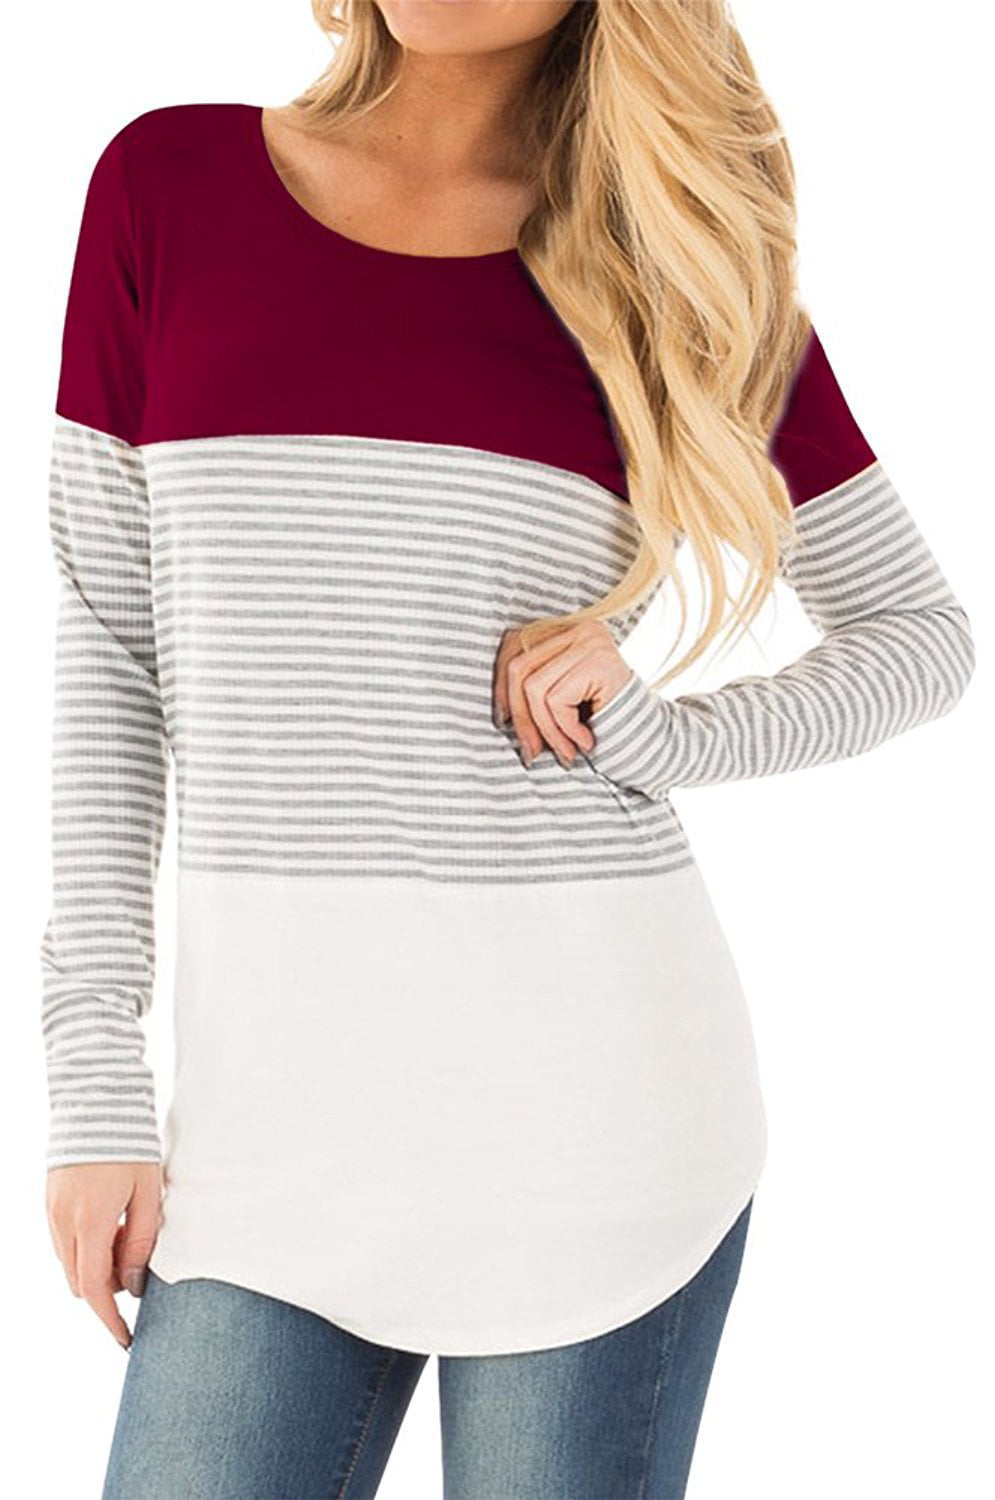 Womens Long Sleeve Round Neck T Shirts Color Block Striped Splice Causal Blouses Tops 